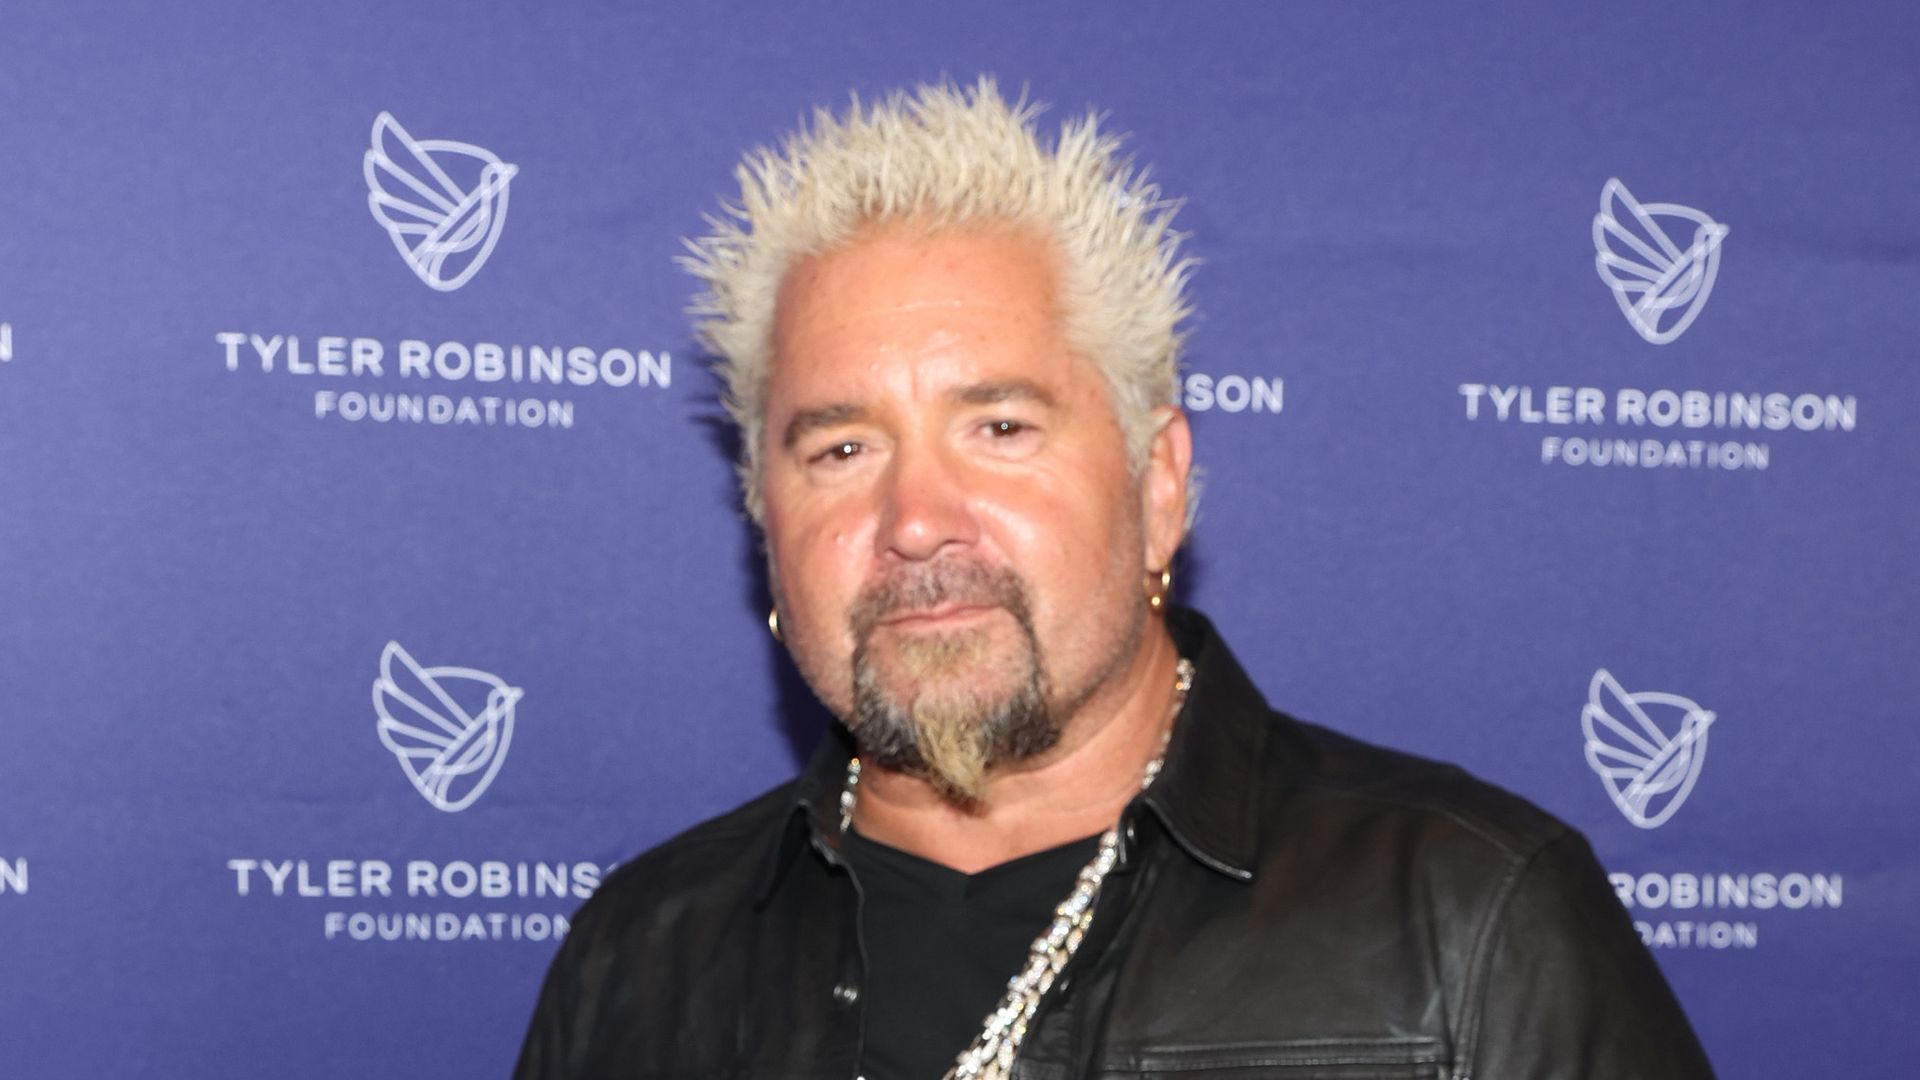 Guy Fieri attends Imagine Dragons' Eighth Annual Tyler Robinson Foundation Rise Up Gala at Resorts World Las Vegas on September 23, 2022 in Las Vegas, Nevada.